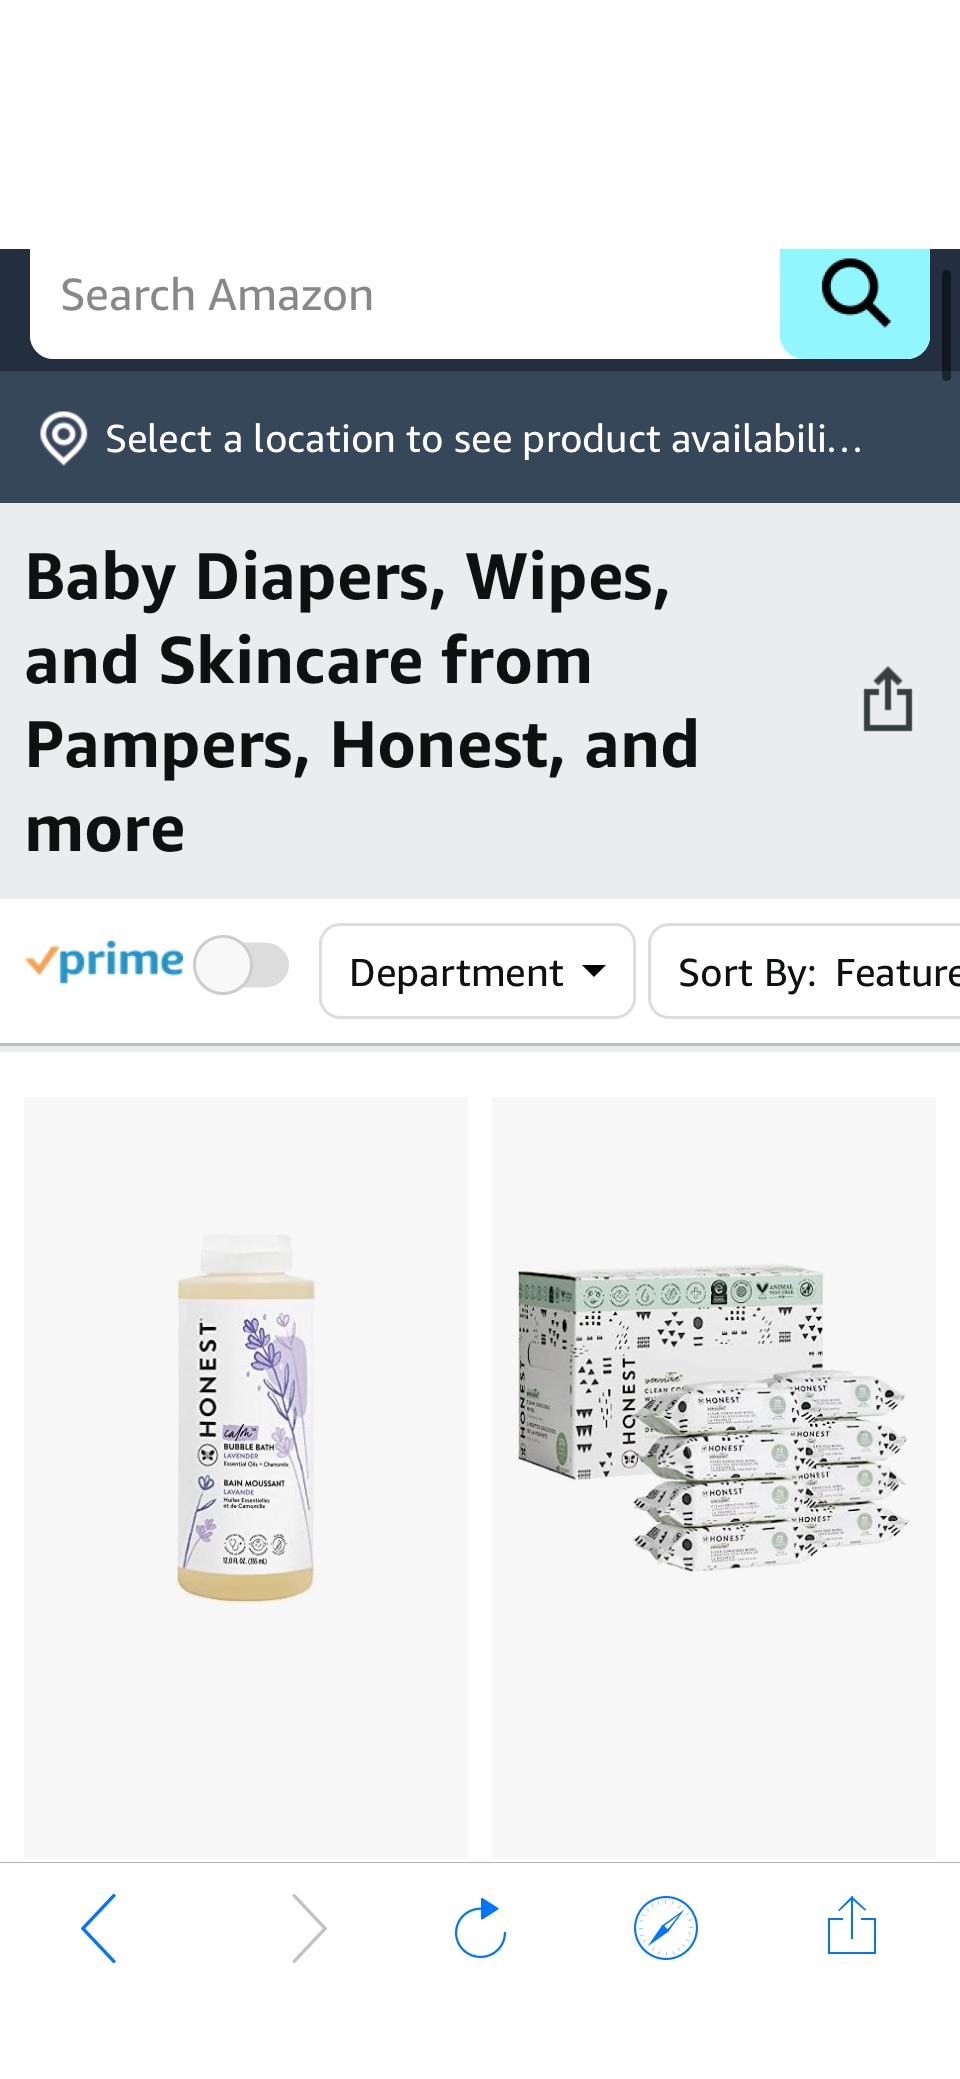 Baby Diapers, Wipes, and Skincare from Pampers, Honest, and more促销4.71起